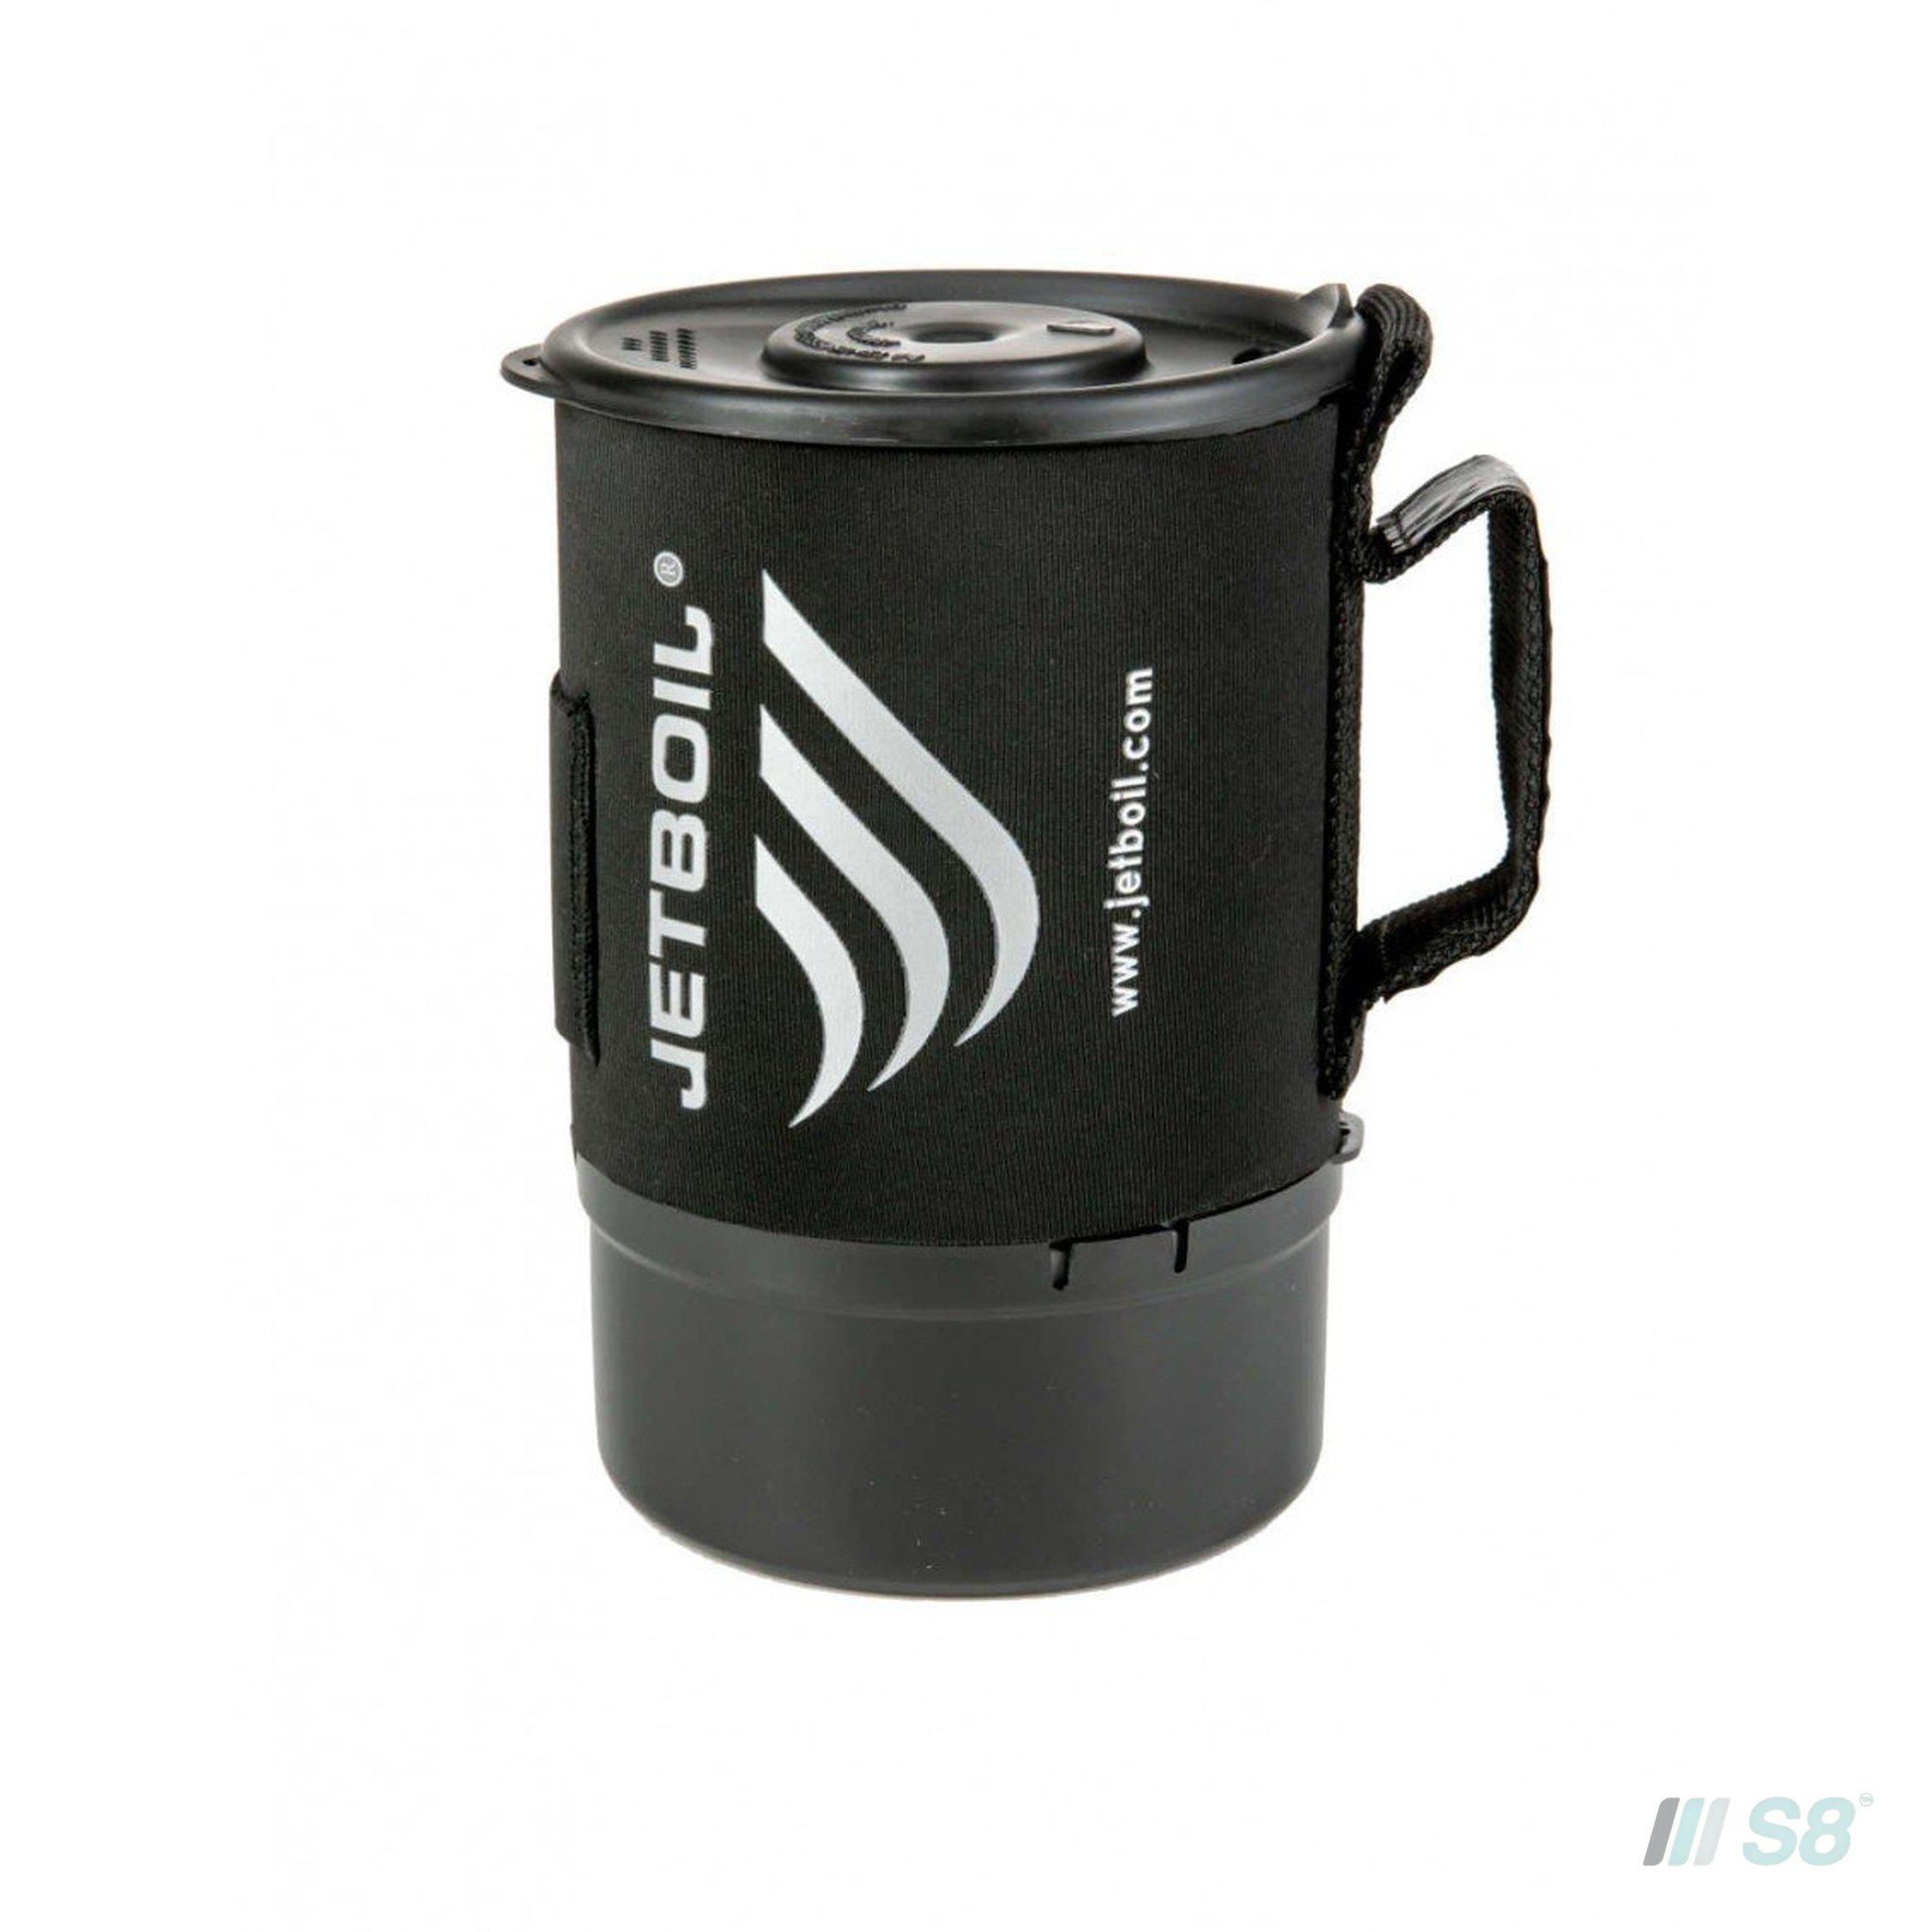 JETBOIL Zip-jetboil-S8 Products Group